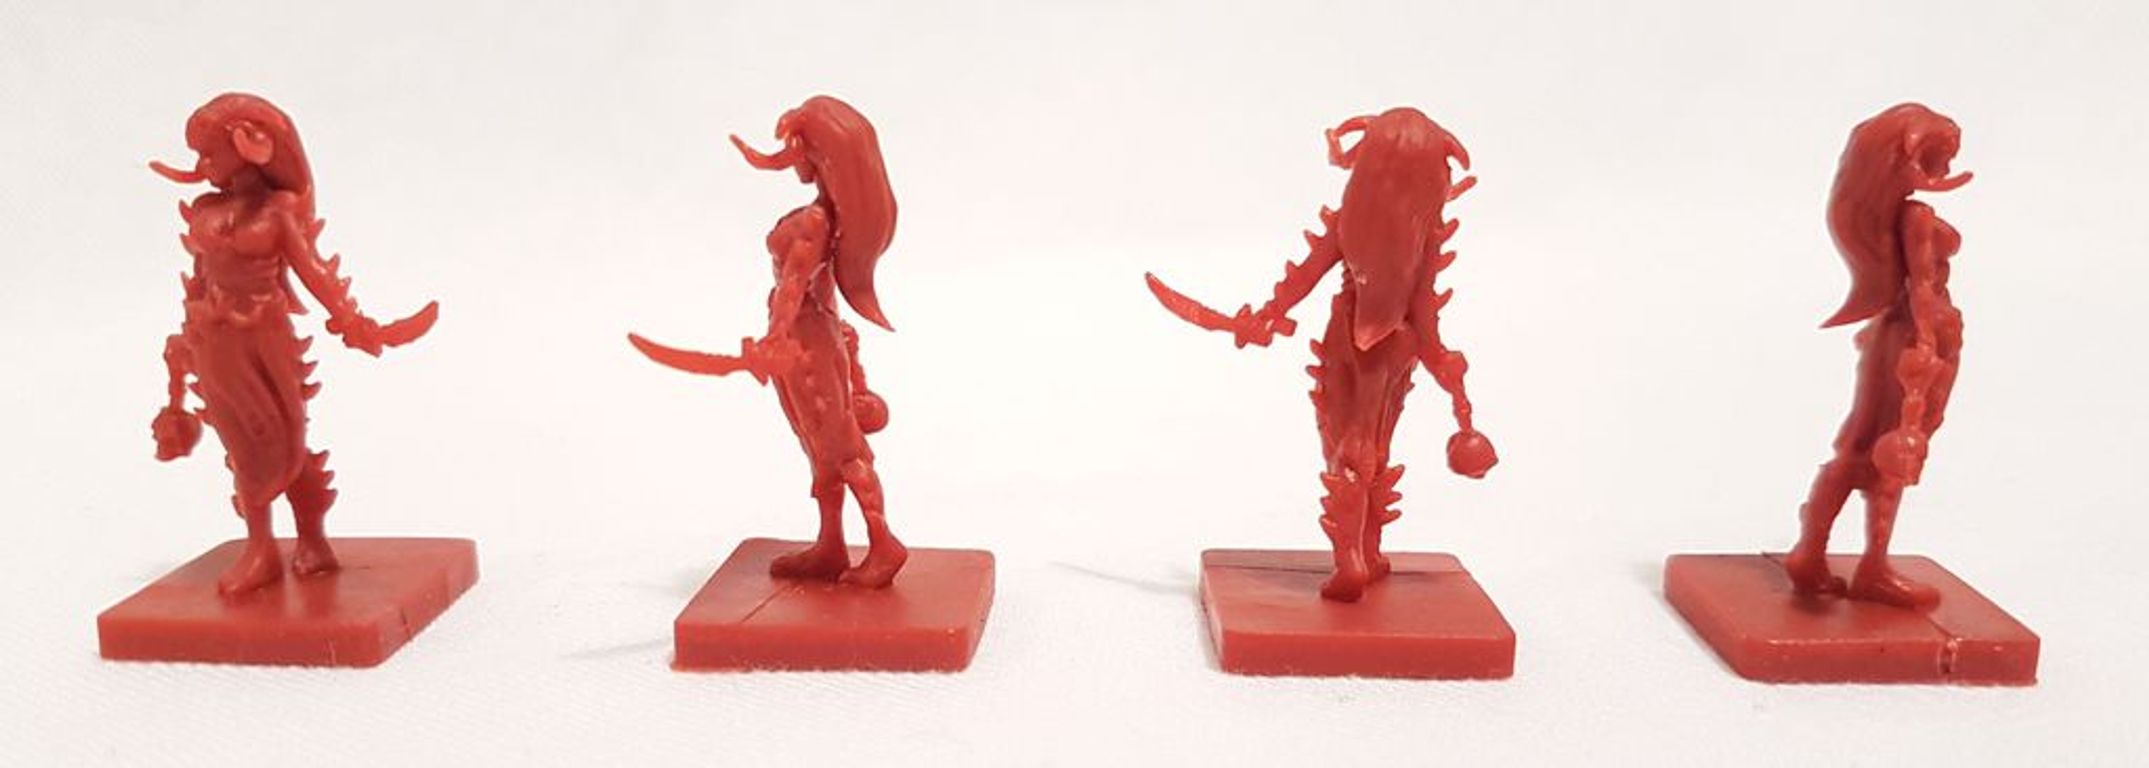 BattleLore (Second Edition): Warband of Scorn Army Pack miniatures